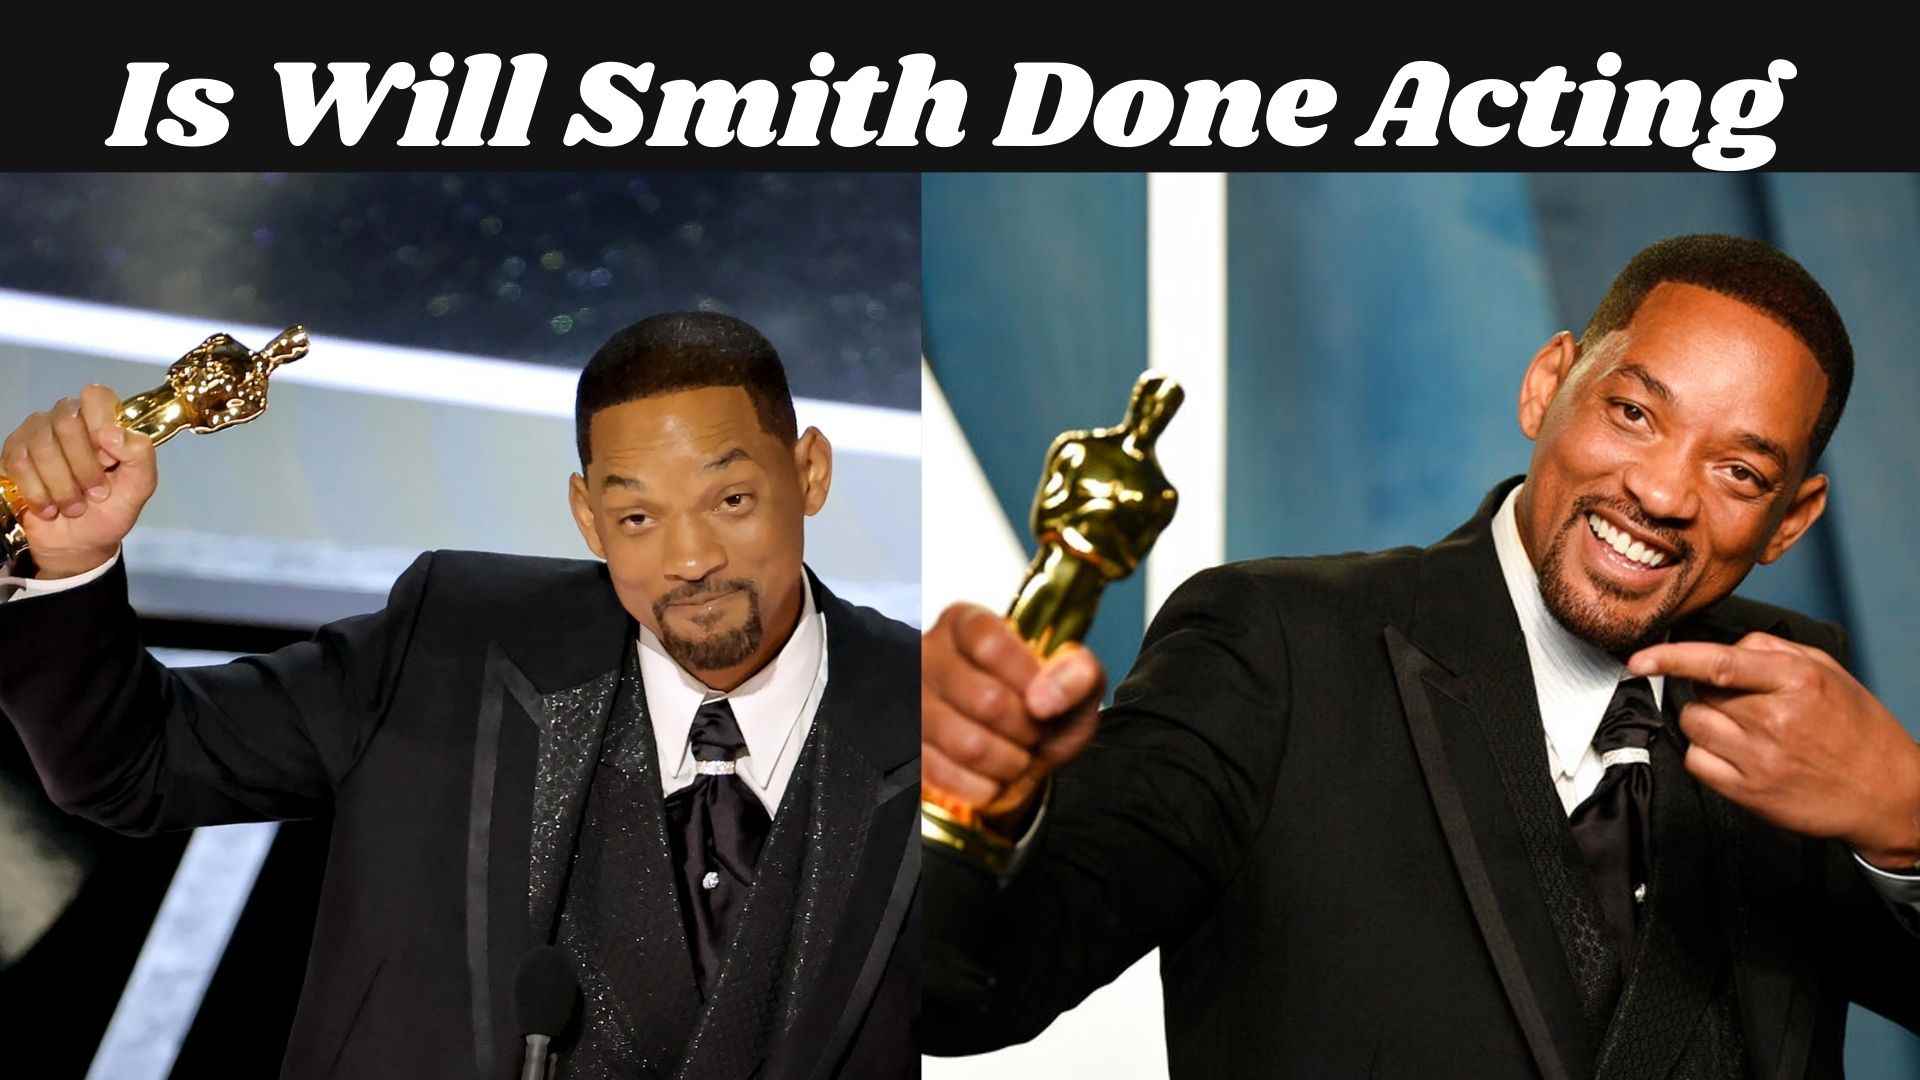 Is Will Smith Done Acting wallpaper and images